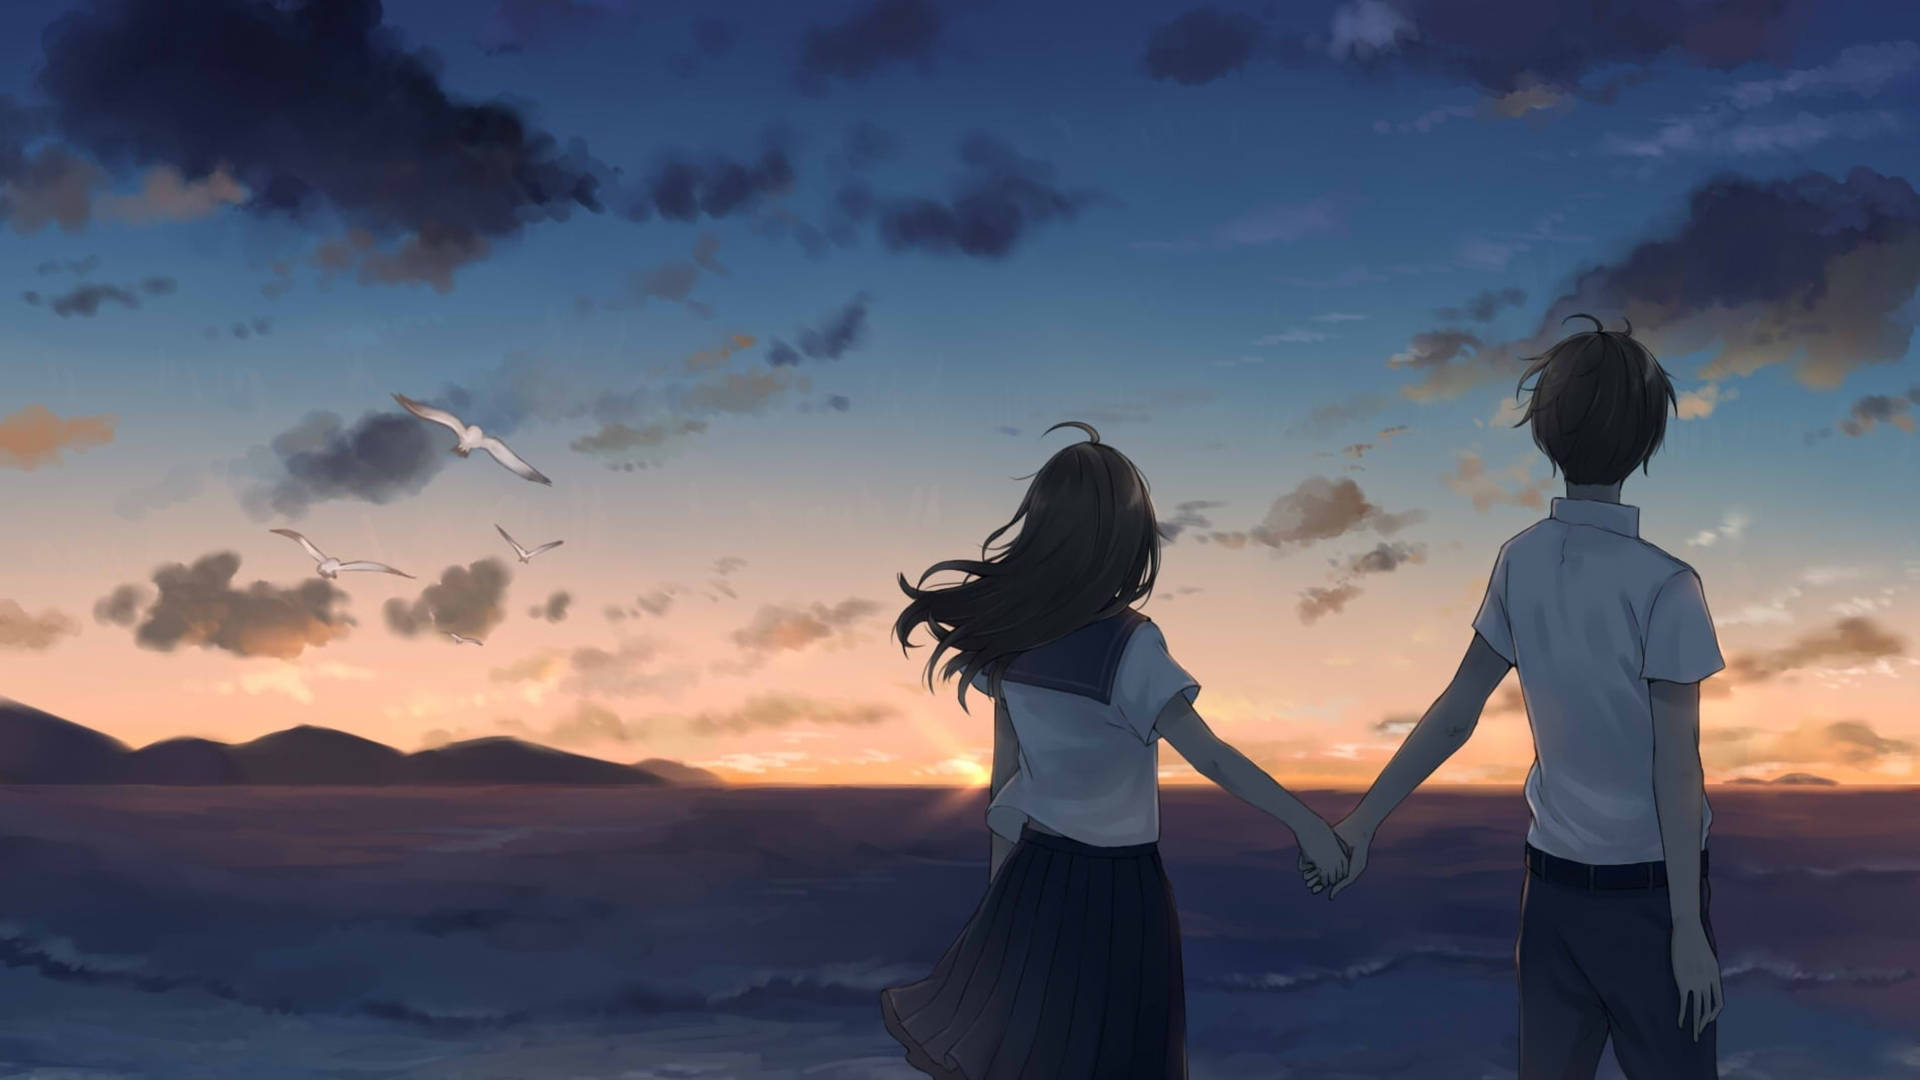 Cute Anime Couple Holding Hands Sunset Background